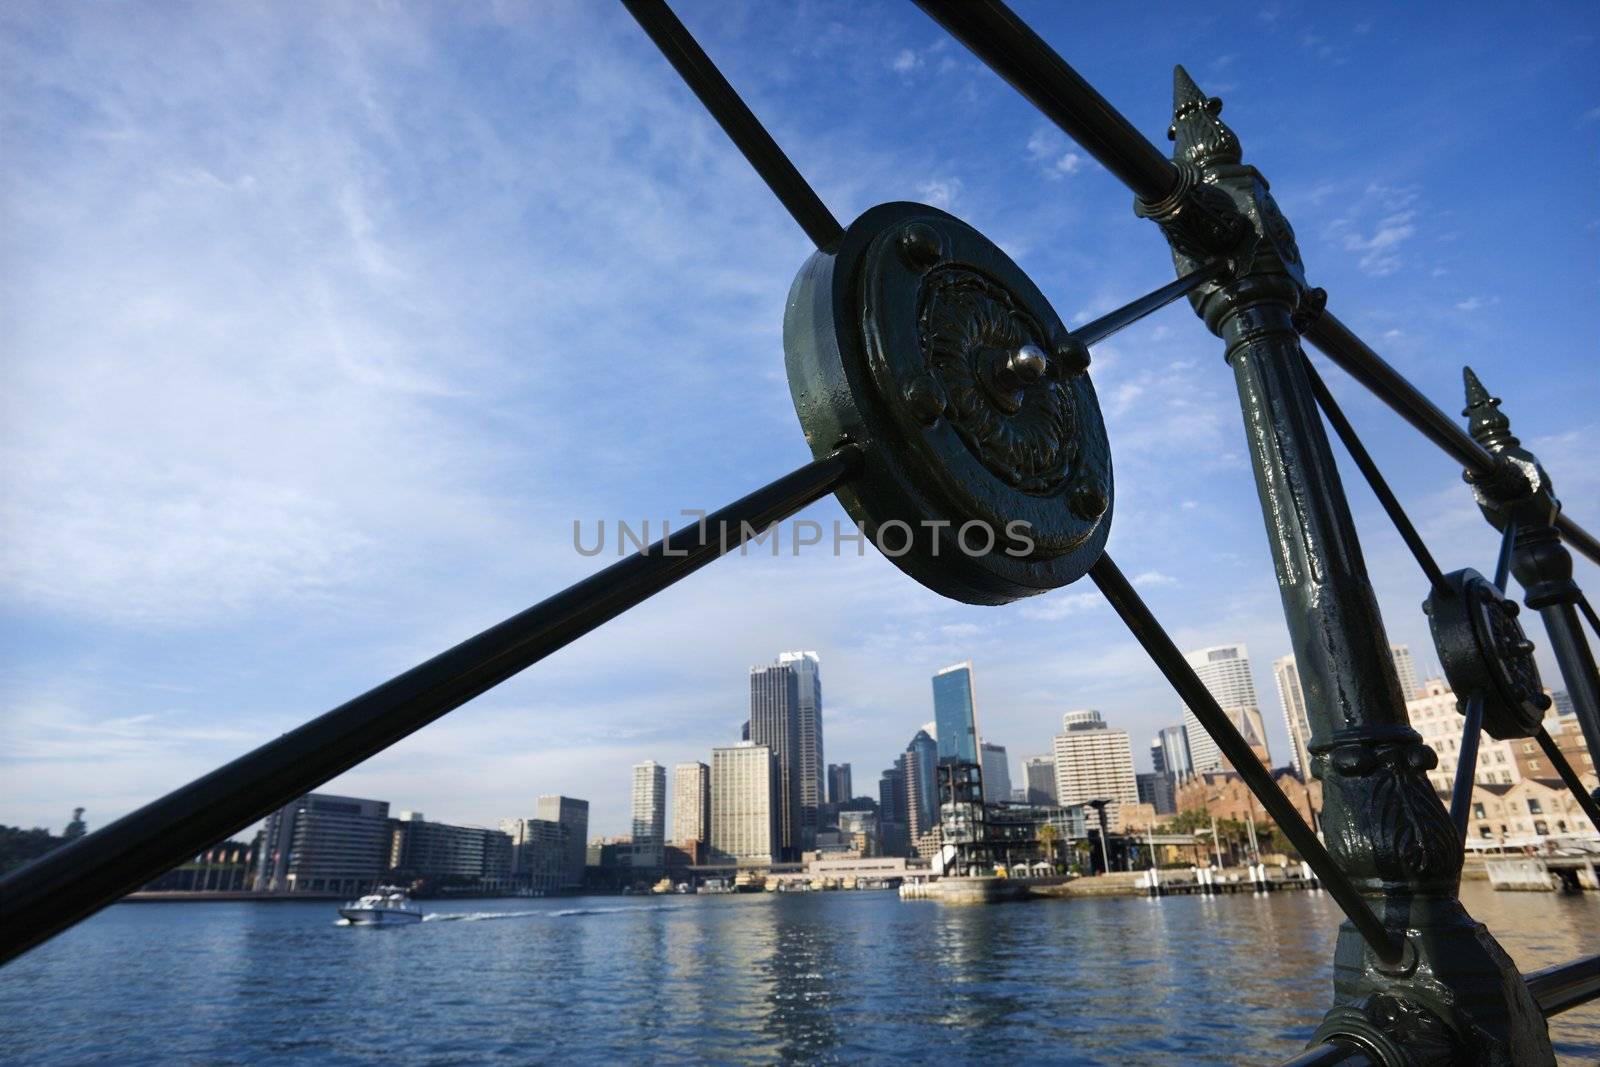 View of Sydney Cove from behind decorative iron railing with city skyline and water in Sydney, Australia.